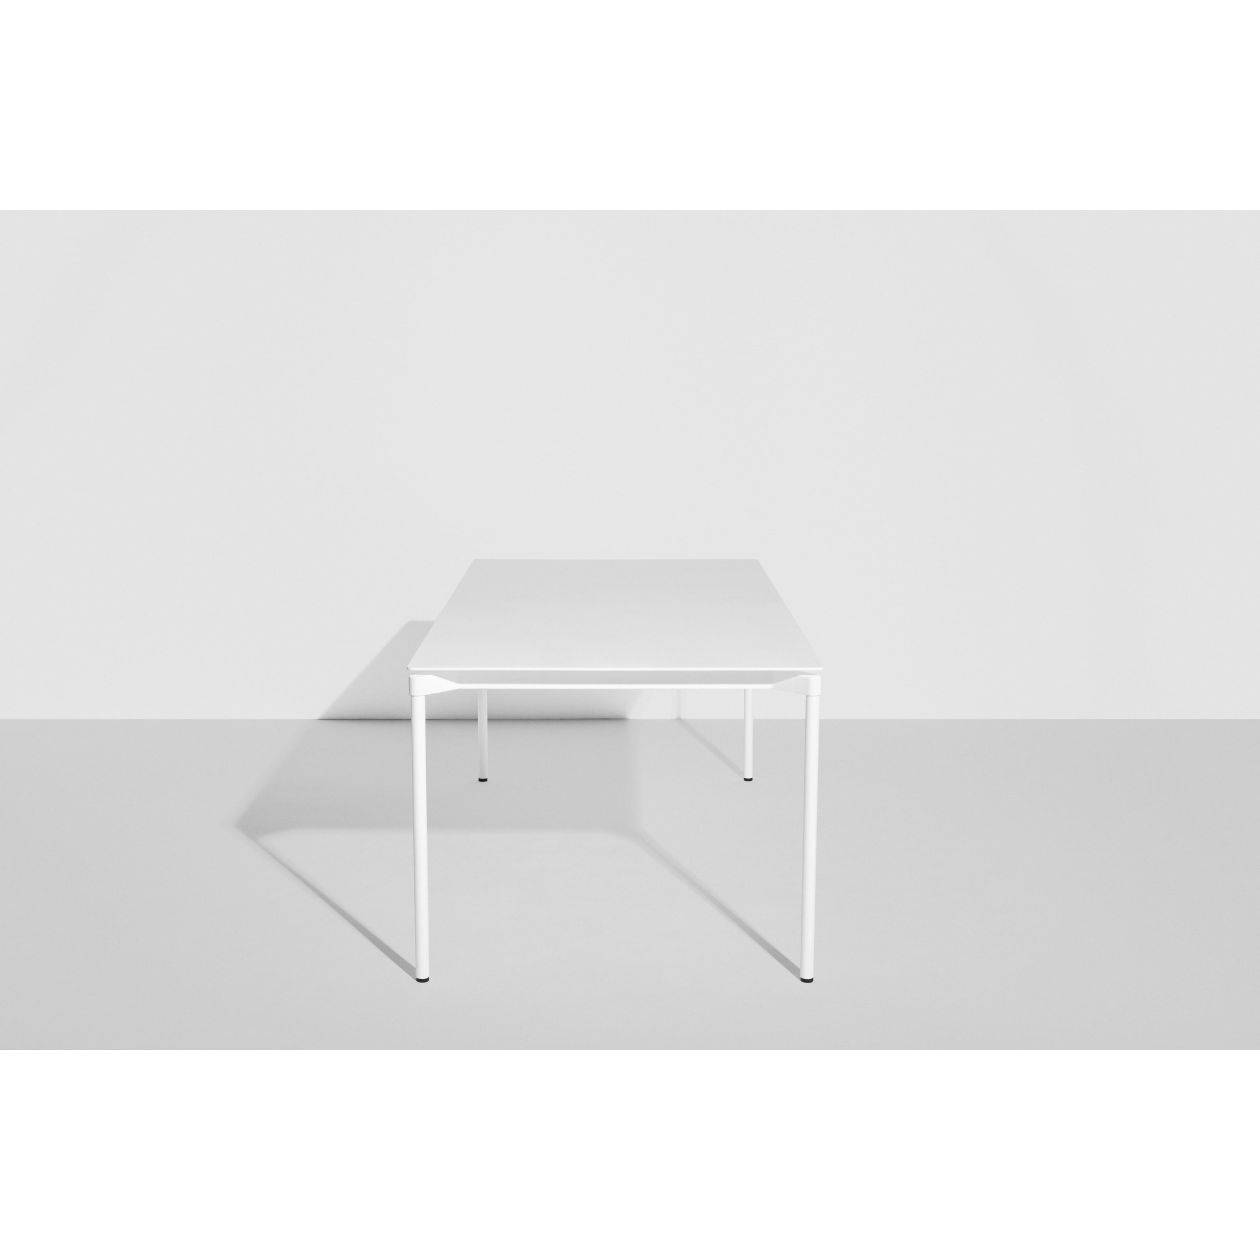 Fromme Rectangular Table - White